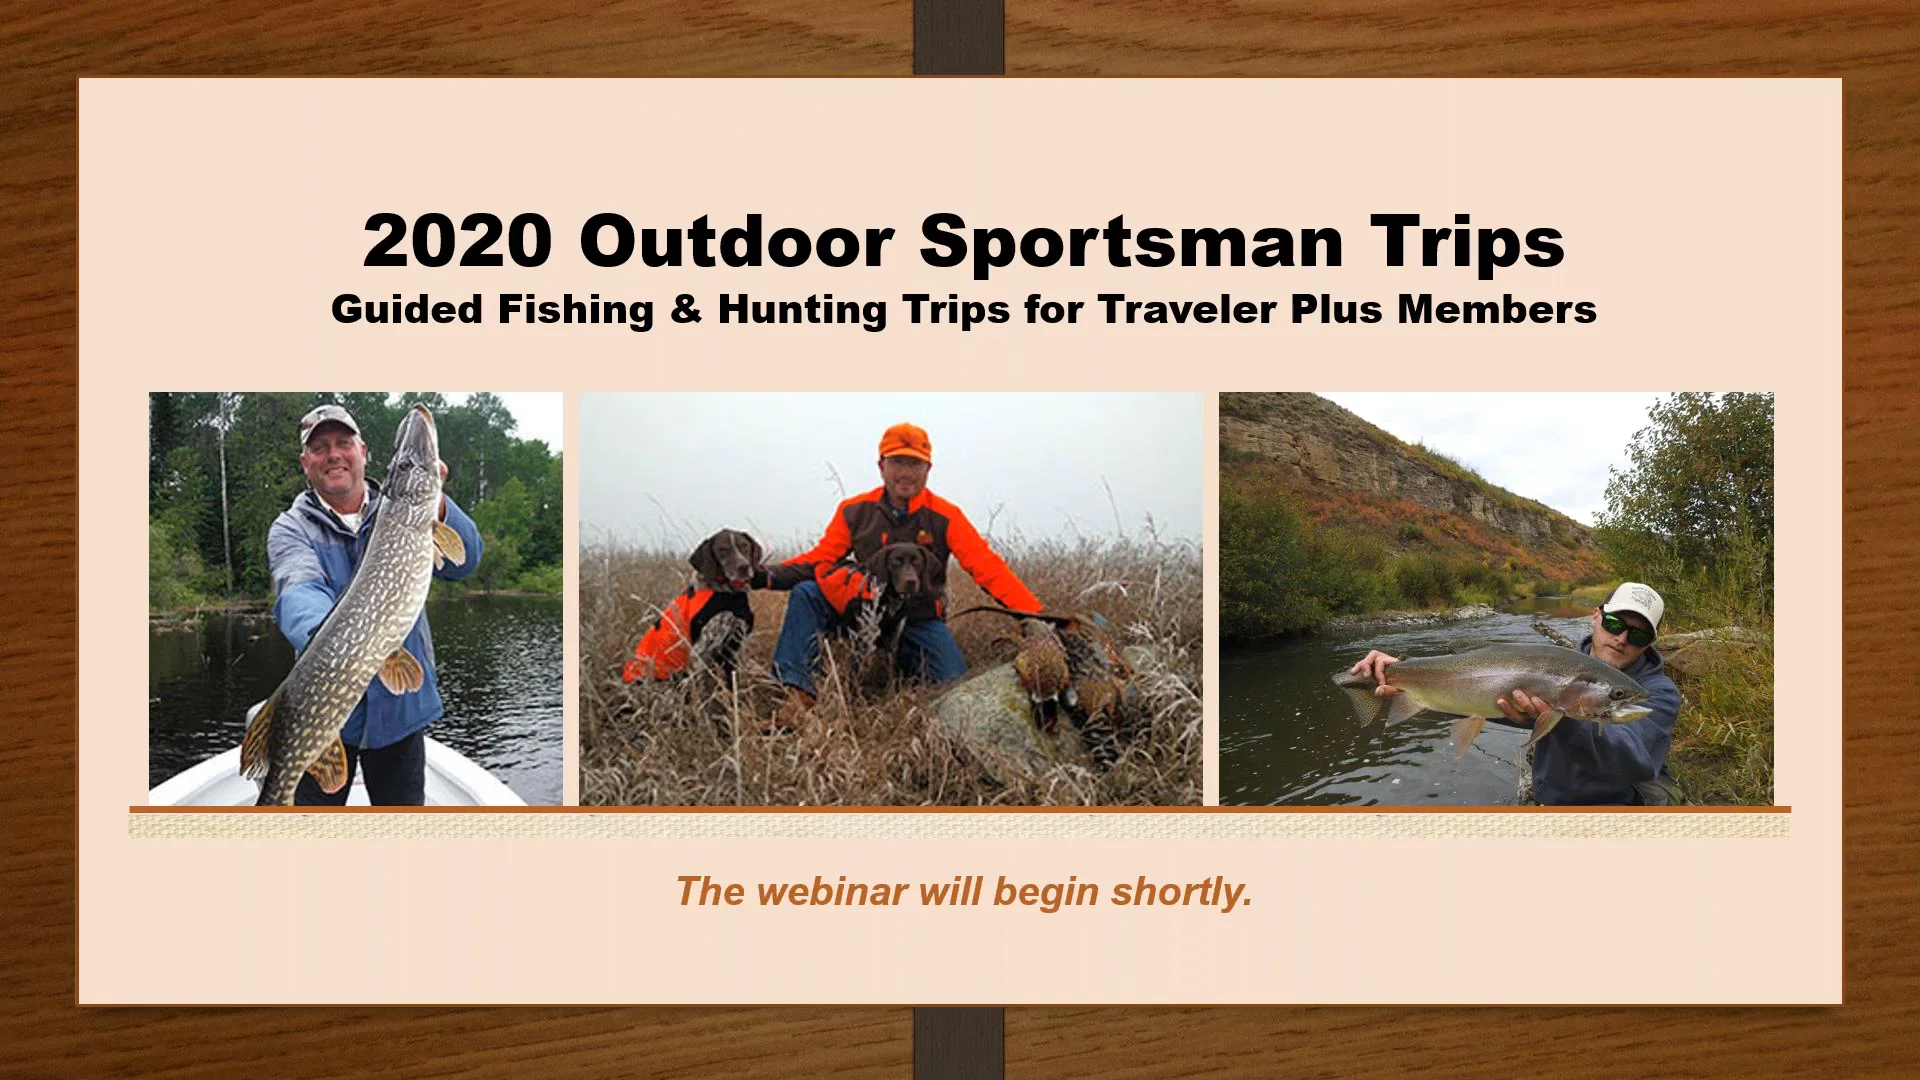 2020 Outdoor Sportsman Guided Fishing & Hunting Trips on Vimeo